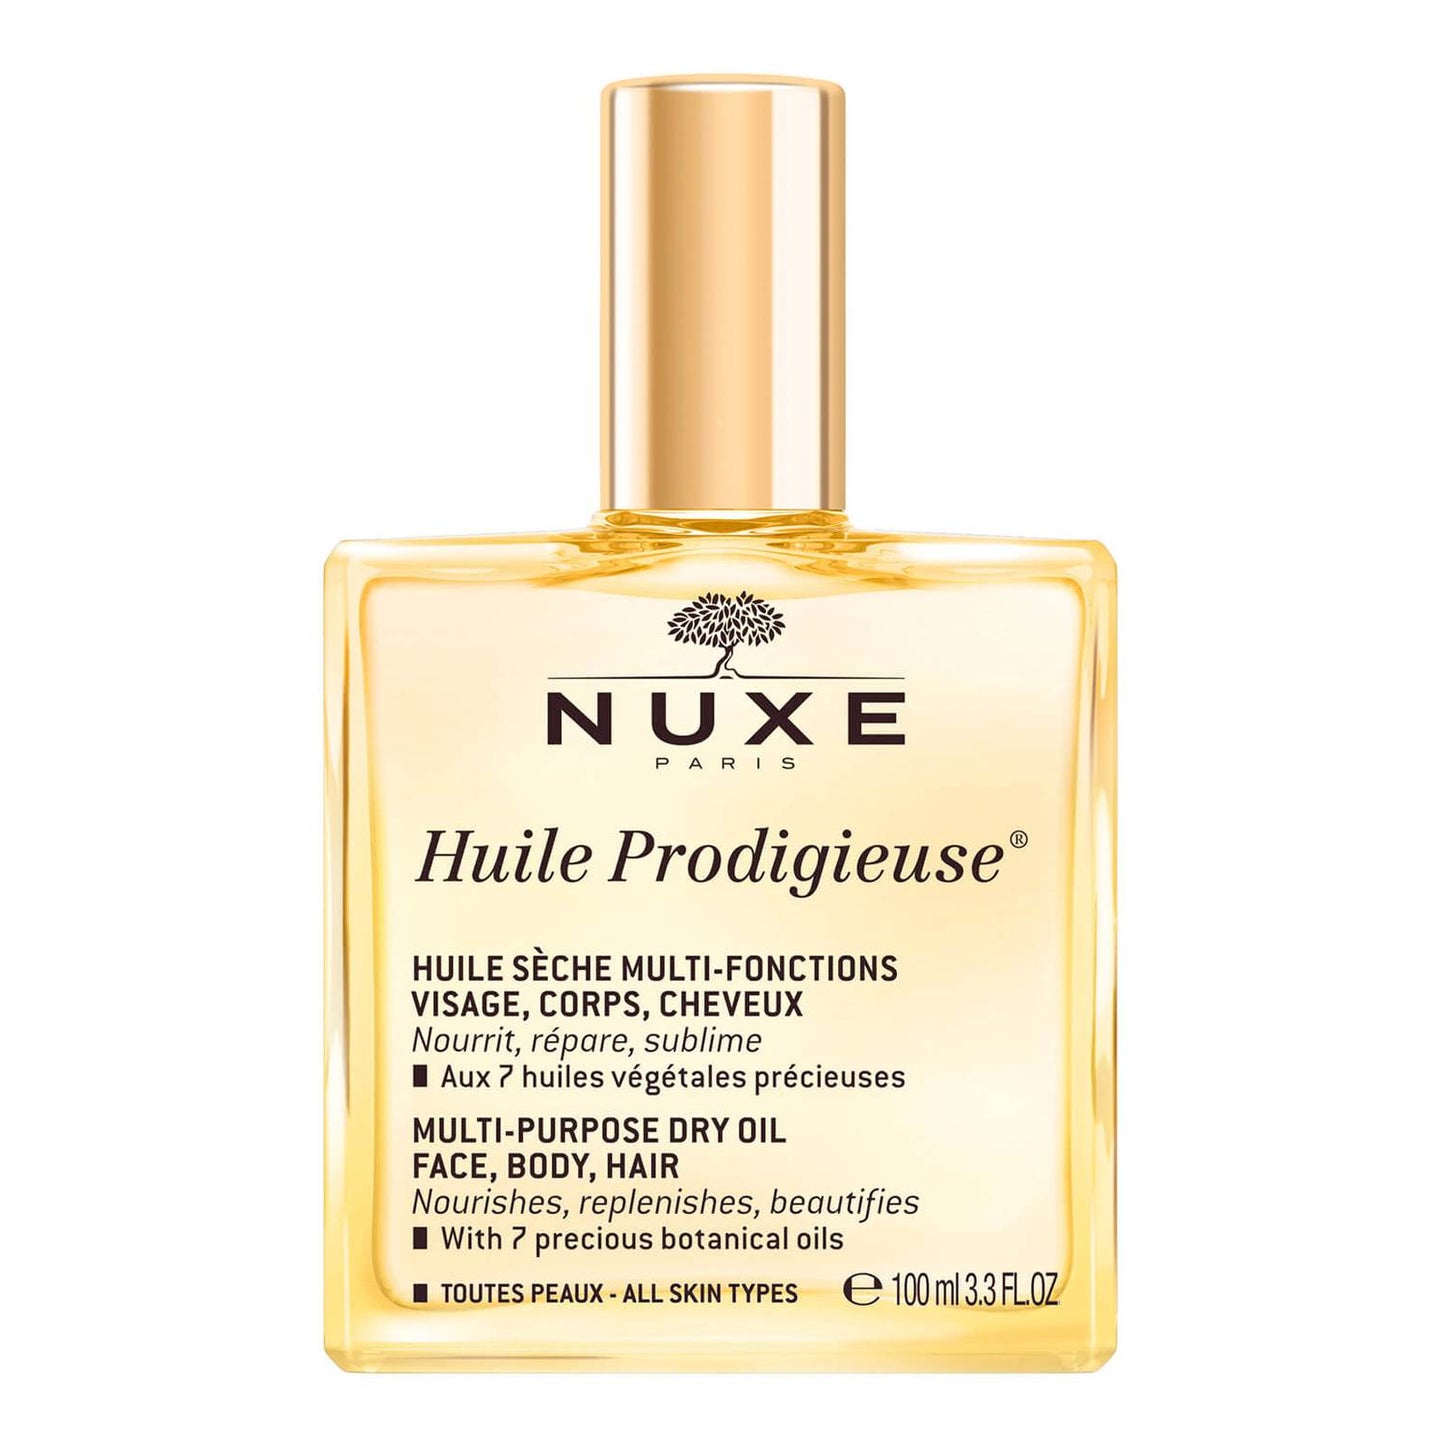 Nuxe Huile Prodigieuse Riche Dry Oil features seven natural oils that deeply moisturise and nourish face, hair, and body simultaneously. 